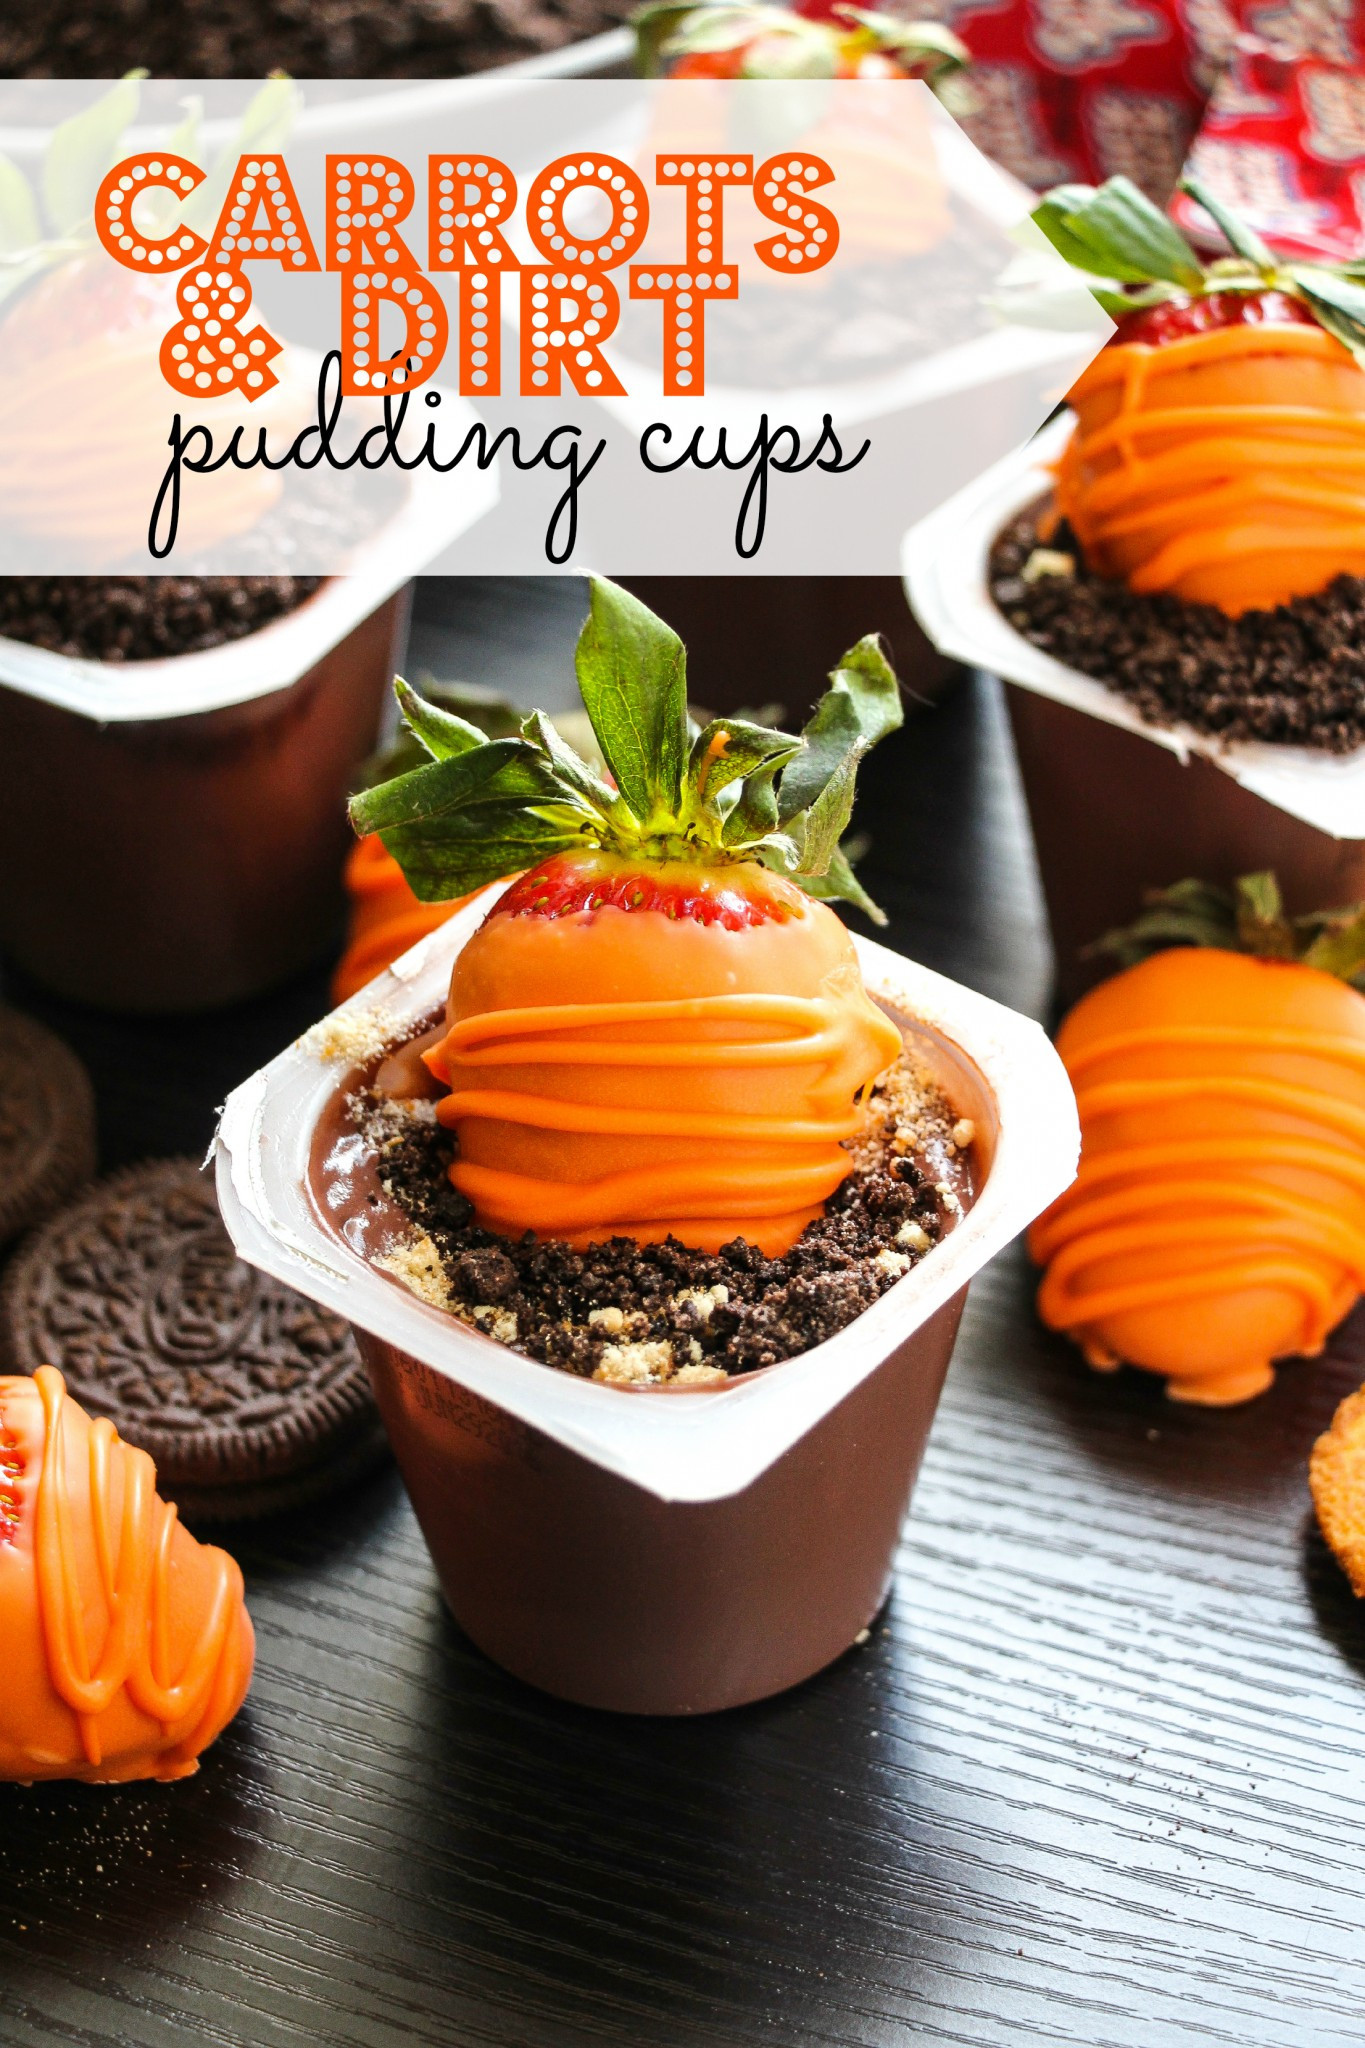 Recipes For Dirt Dessert
 Easy Carrots & Dirt Pudding Cups Layers of Happiness